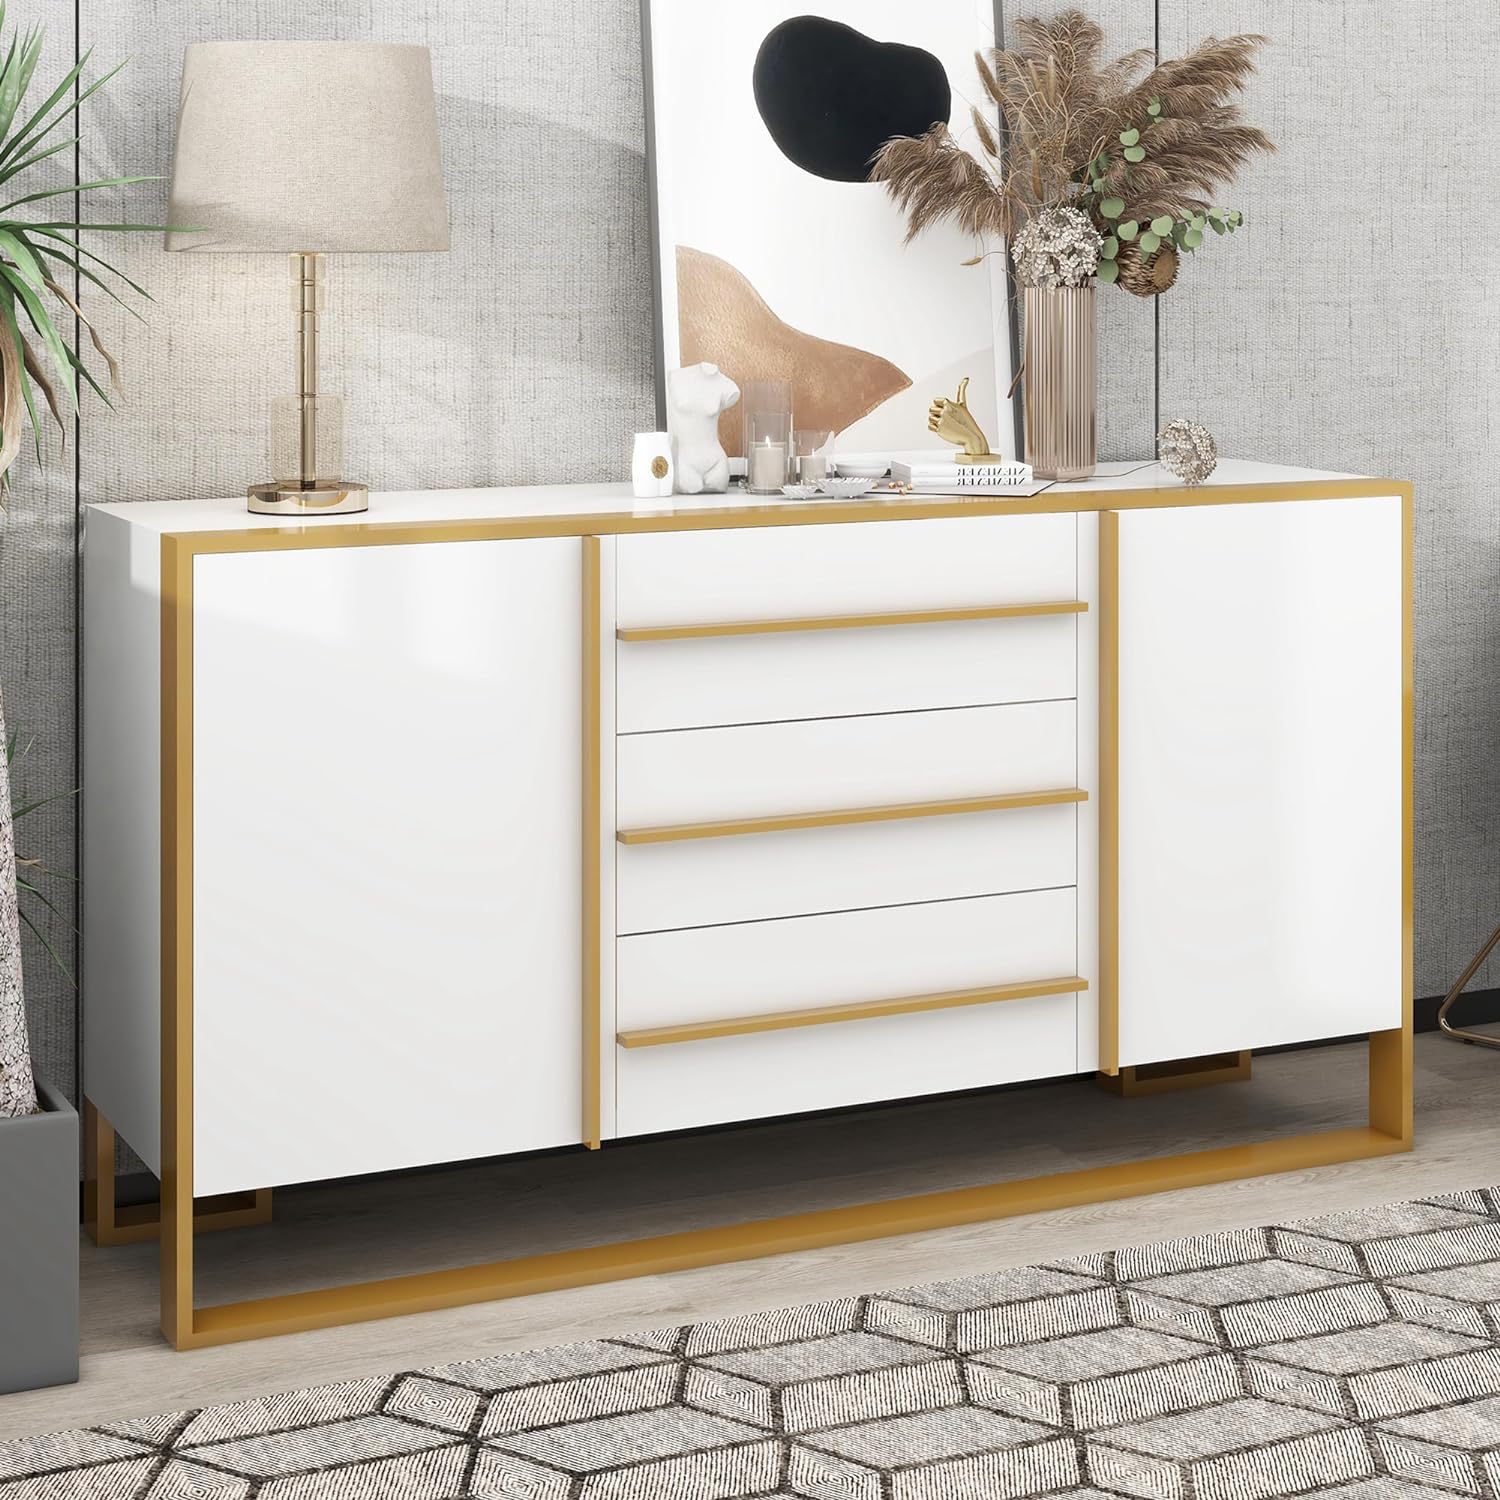 WILLIAMSPACE 59 White Sideboard Buffet Cabinet with 3 Drawers, Modern Wood Cabinet with Gold Metal Frame, Large Storage Space, Adjustable Shelves, Sideboard for Living Room, Entryway (White)